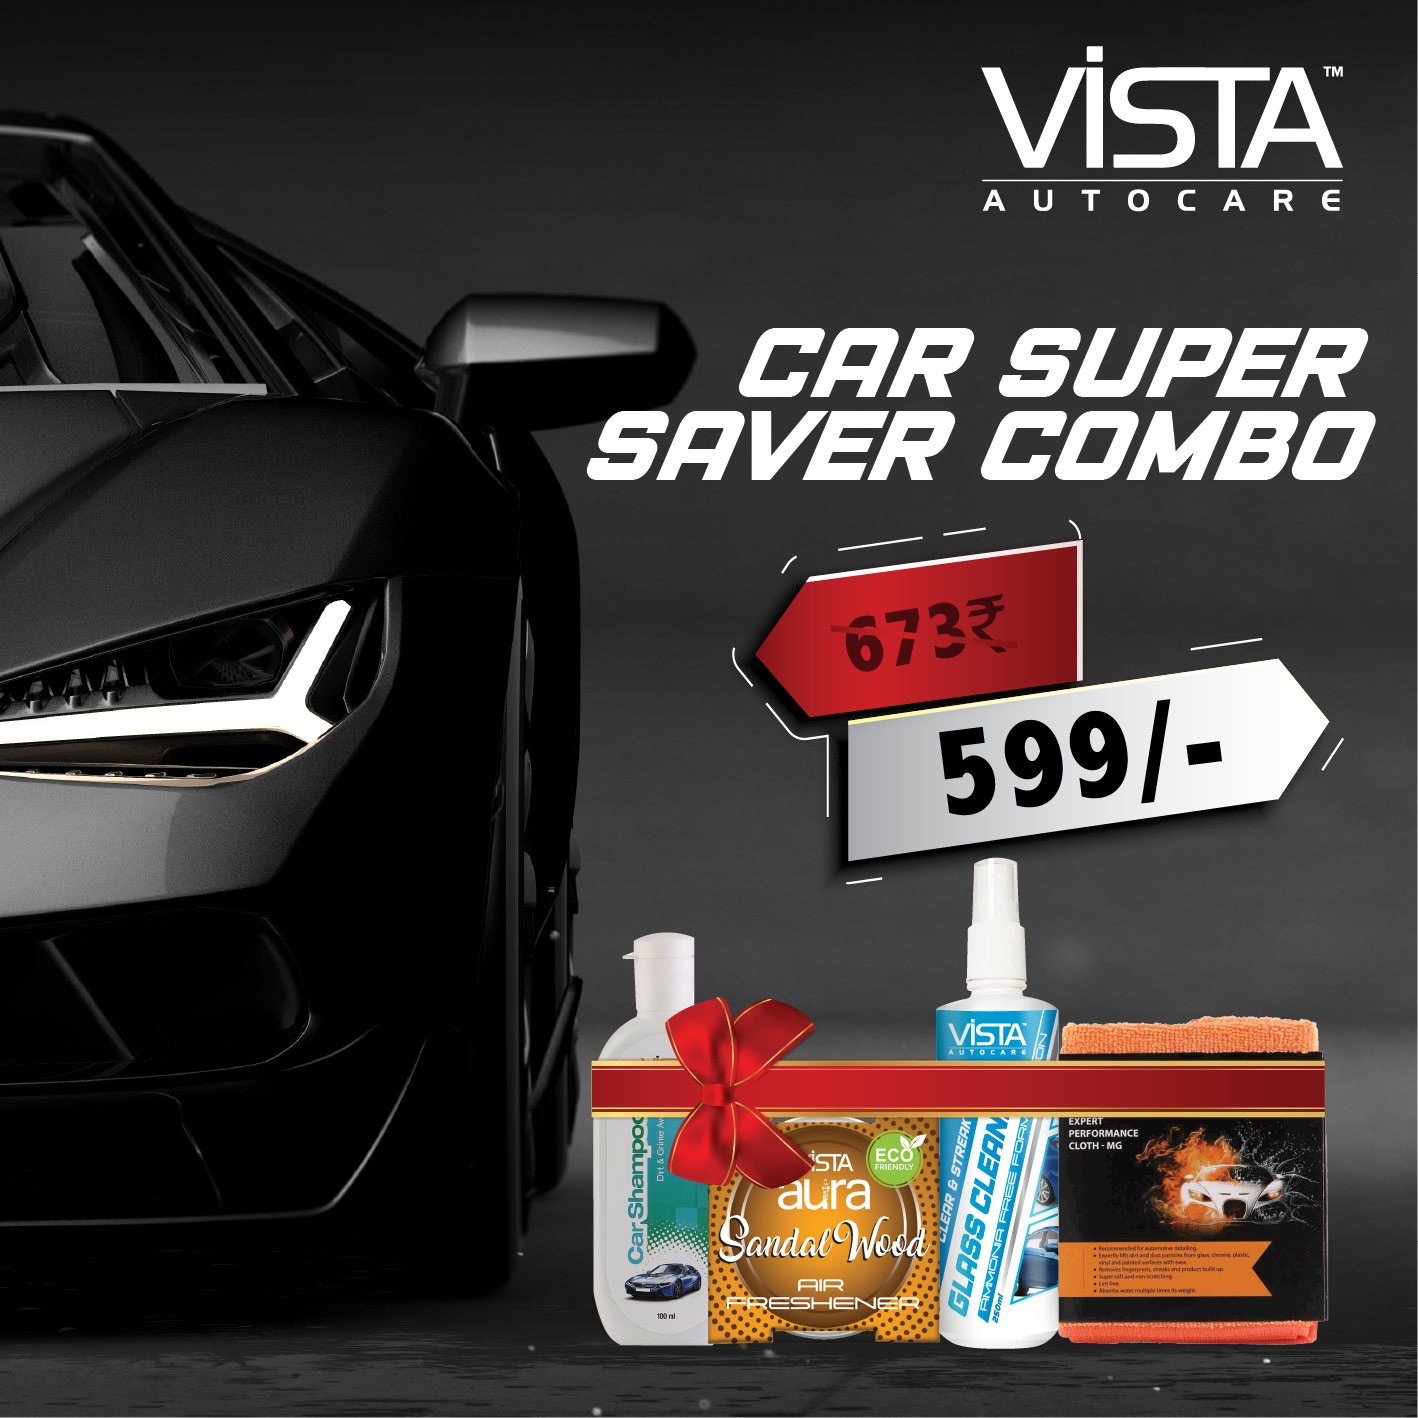 Y5 Car Care on X: Give your car's windscreen a super glossy shine &  Protection from windshield scratches & stains with Y5 Car Care Wind Screen  Polish. For more details: 7799953004, 9703083004 #